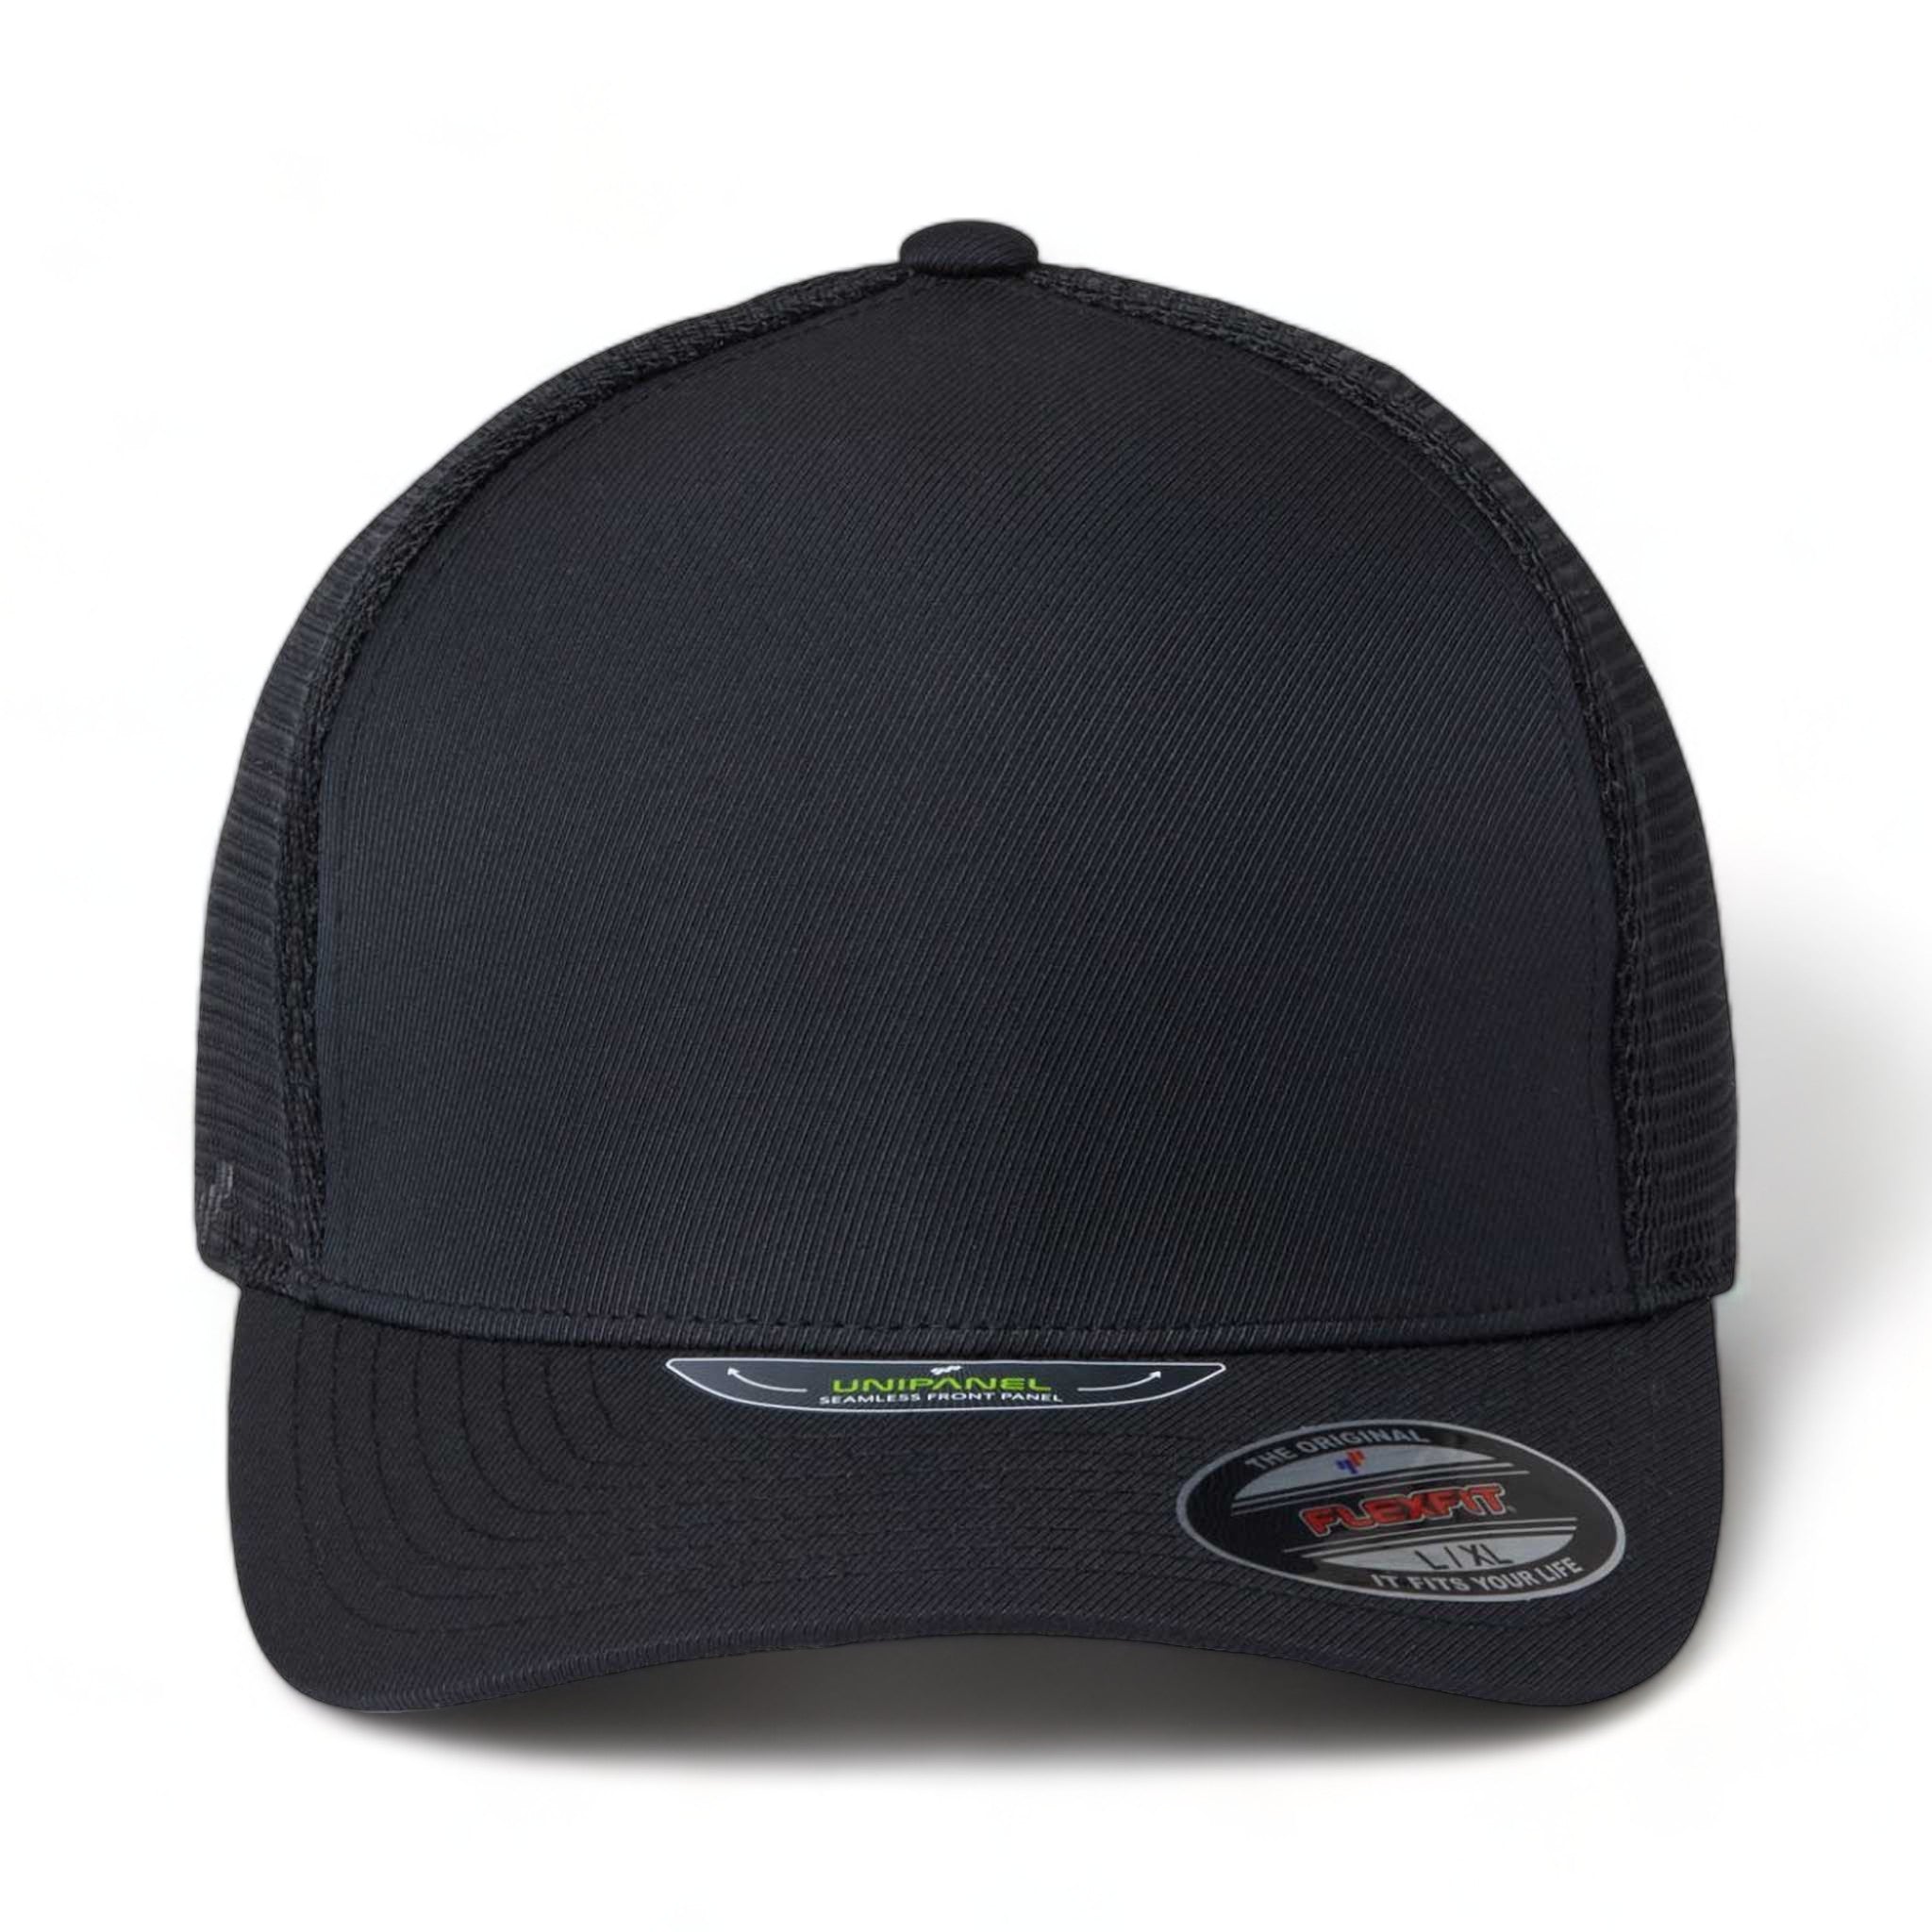 Front view of Flexfit 5511UP custom hat in black